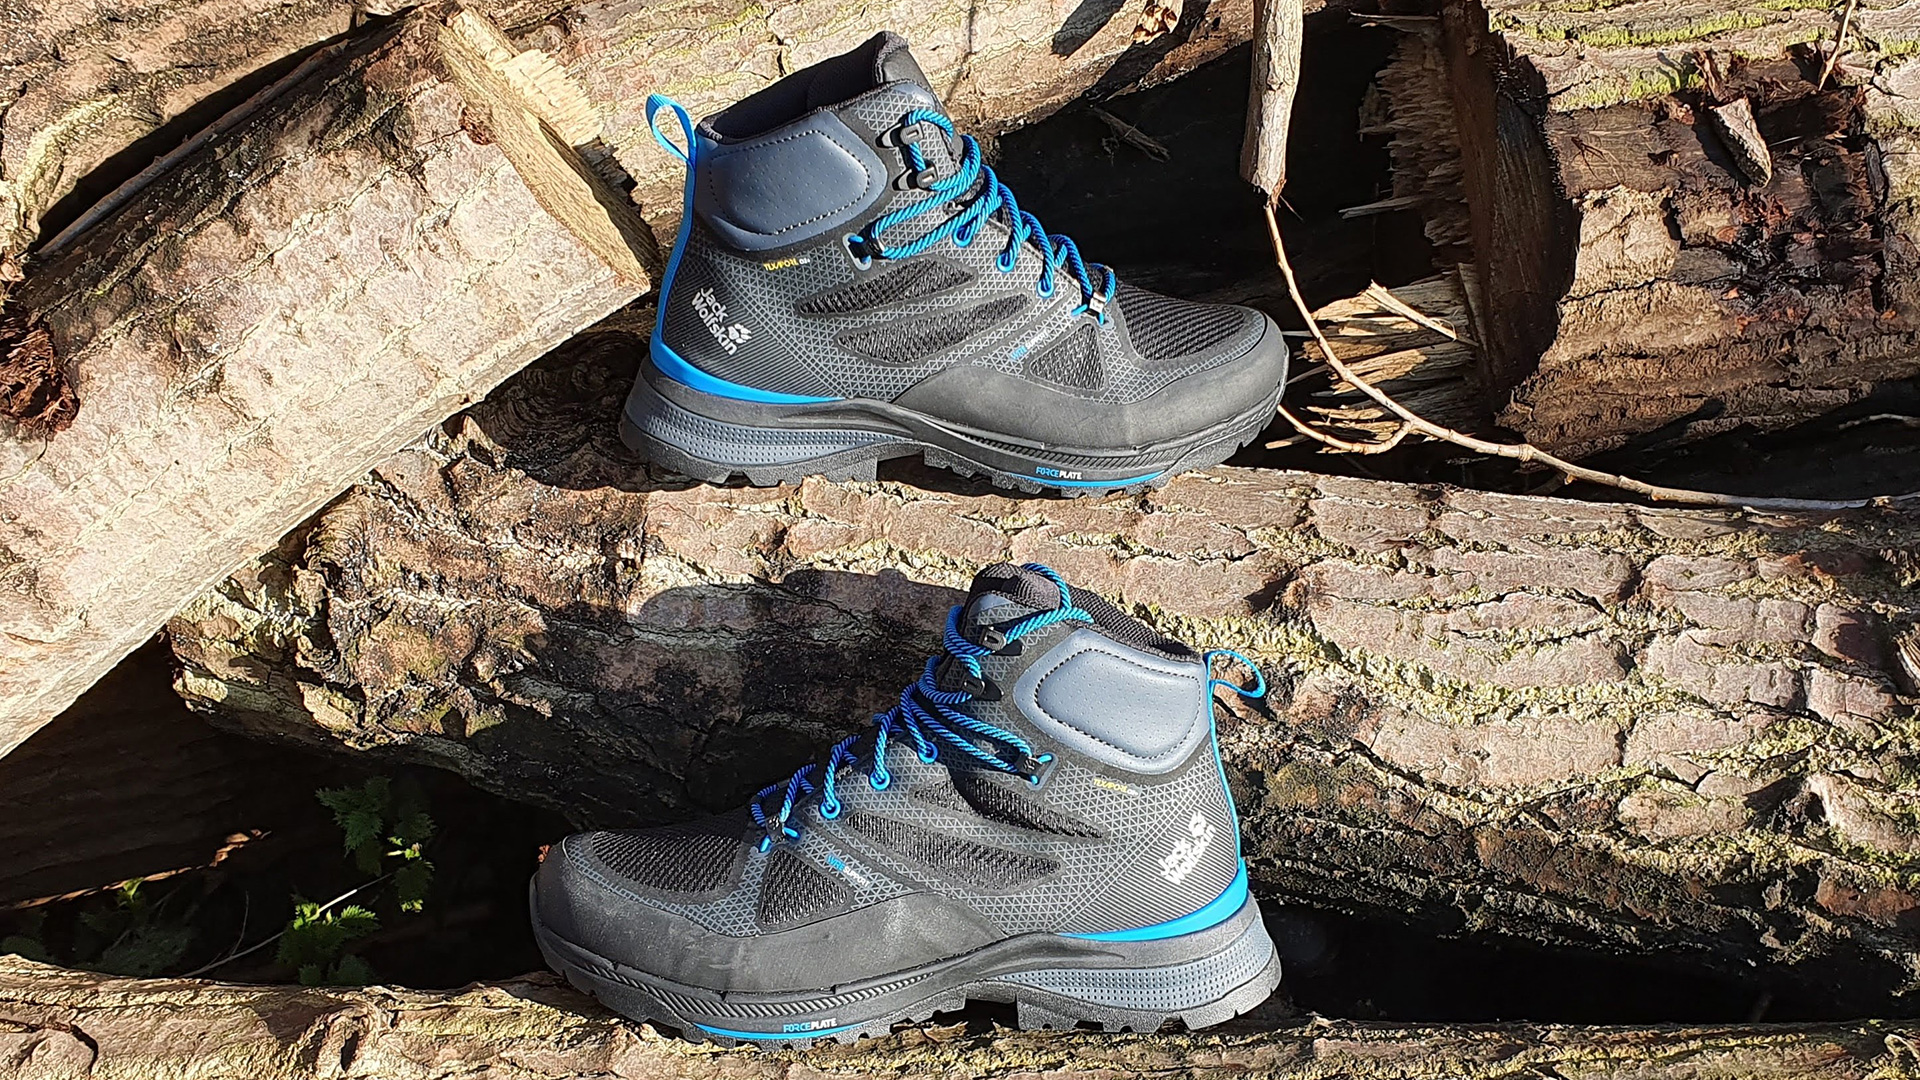 Jack Wolfskin Force Striker Texapore hiking boot review | T3